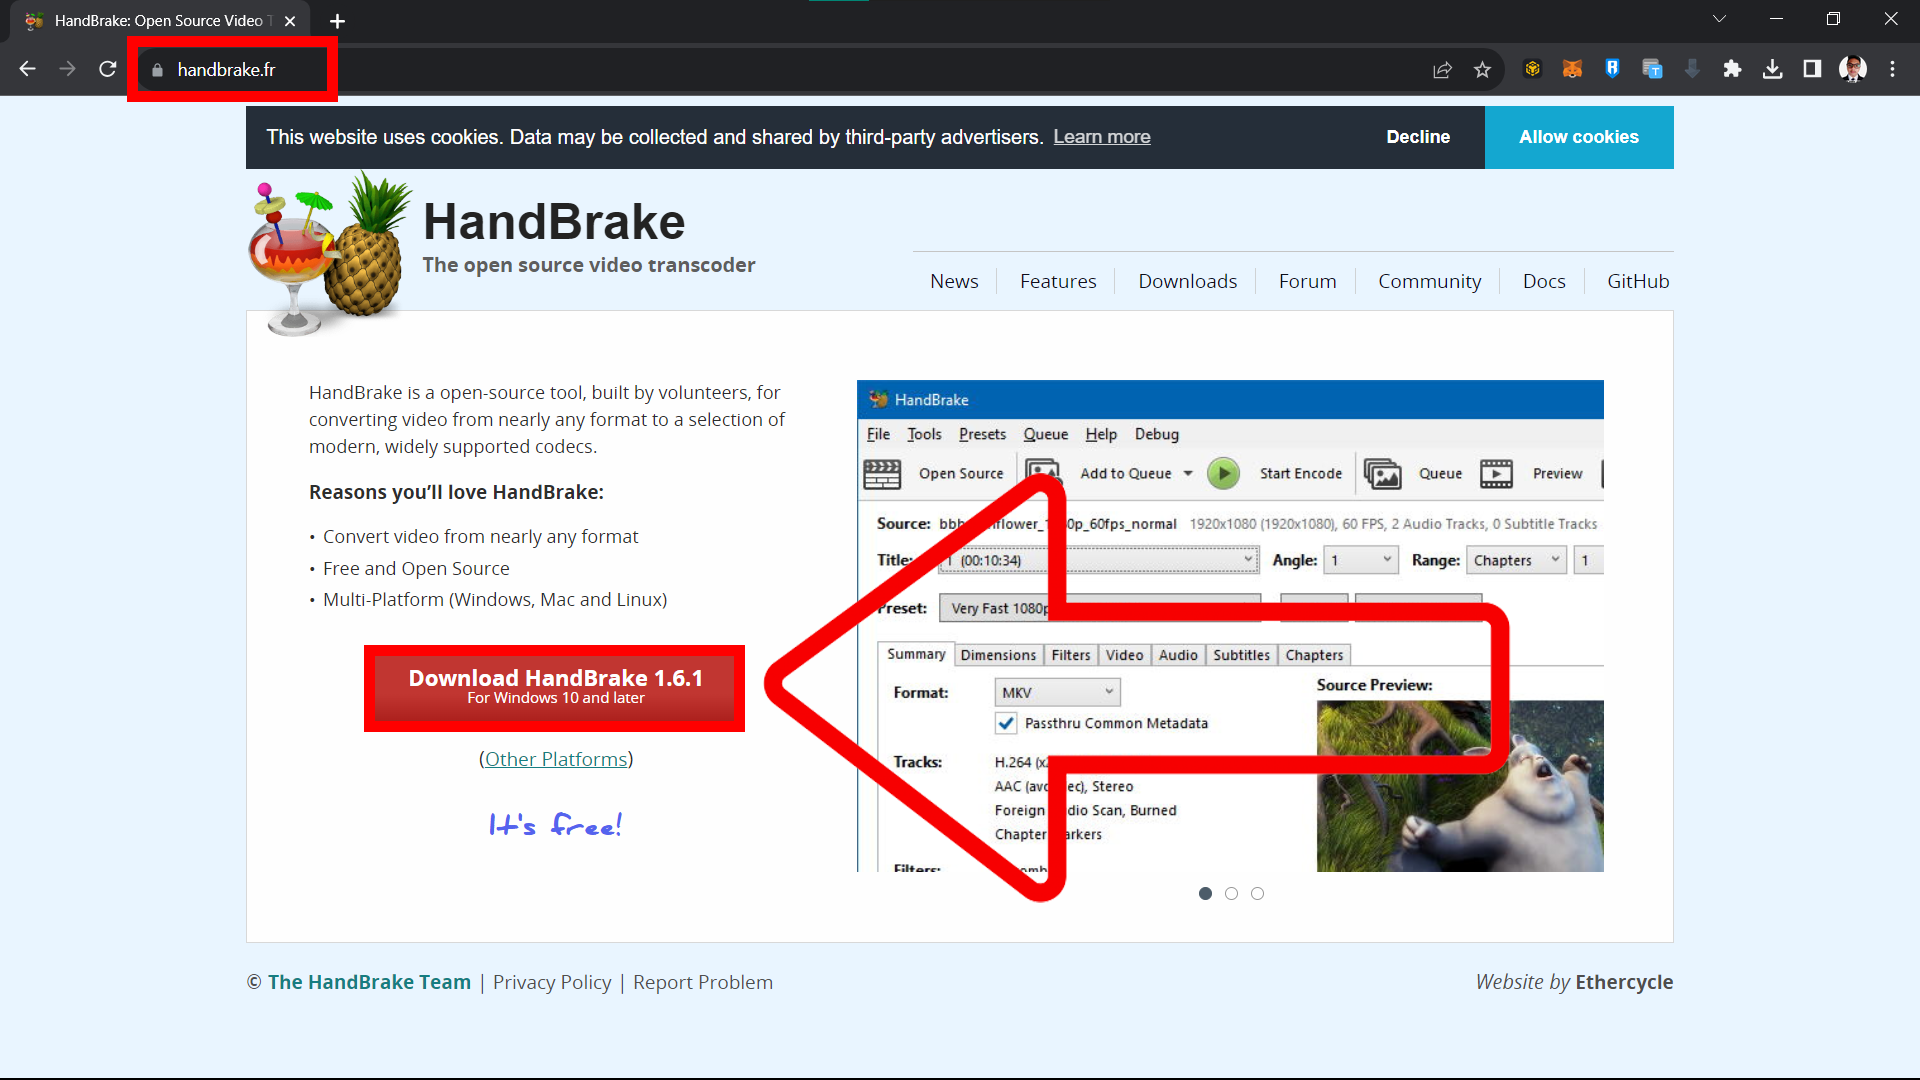 Getting Started with Handbrake: Step 1